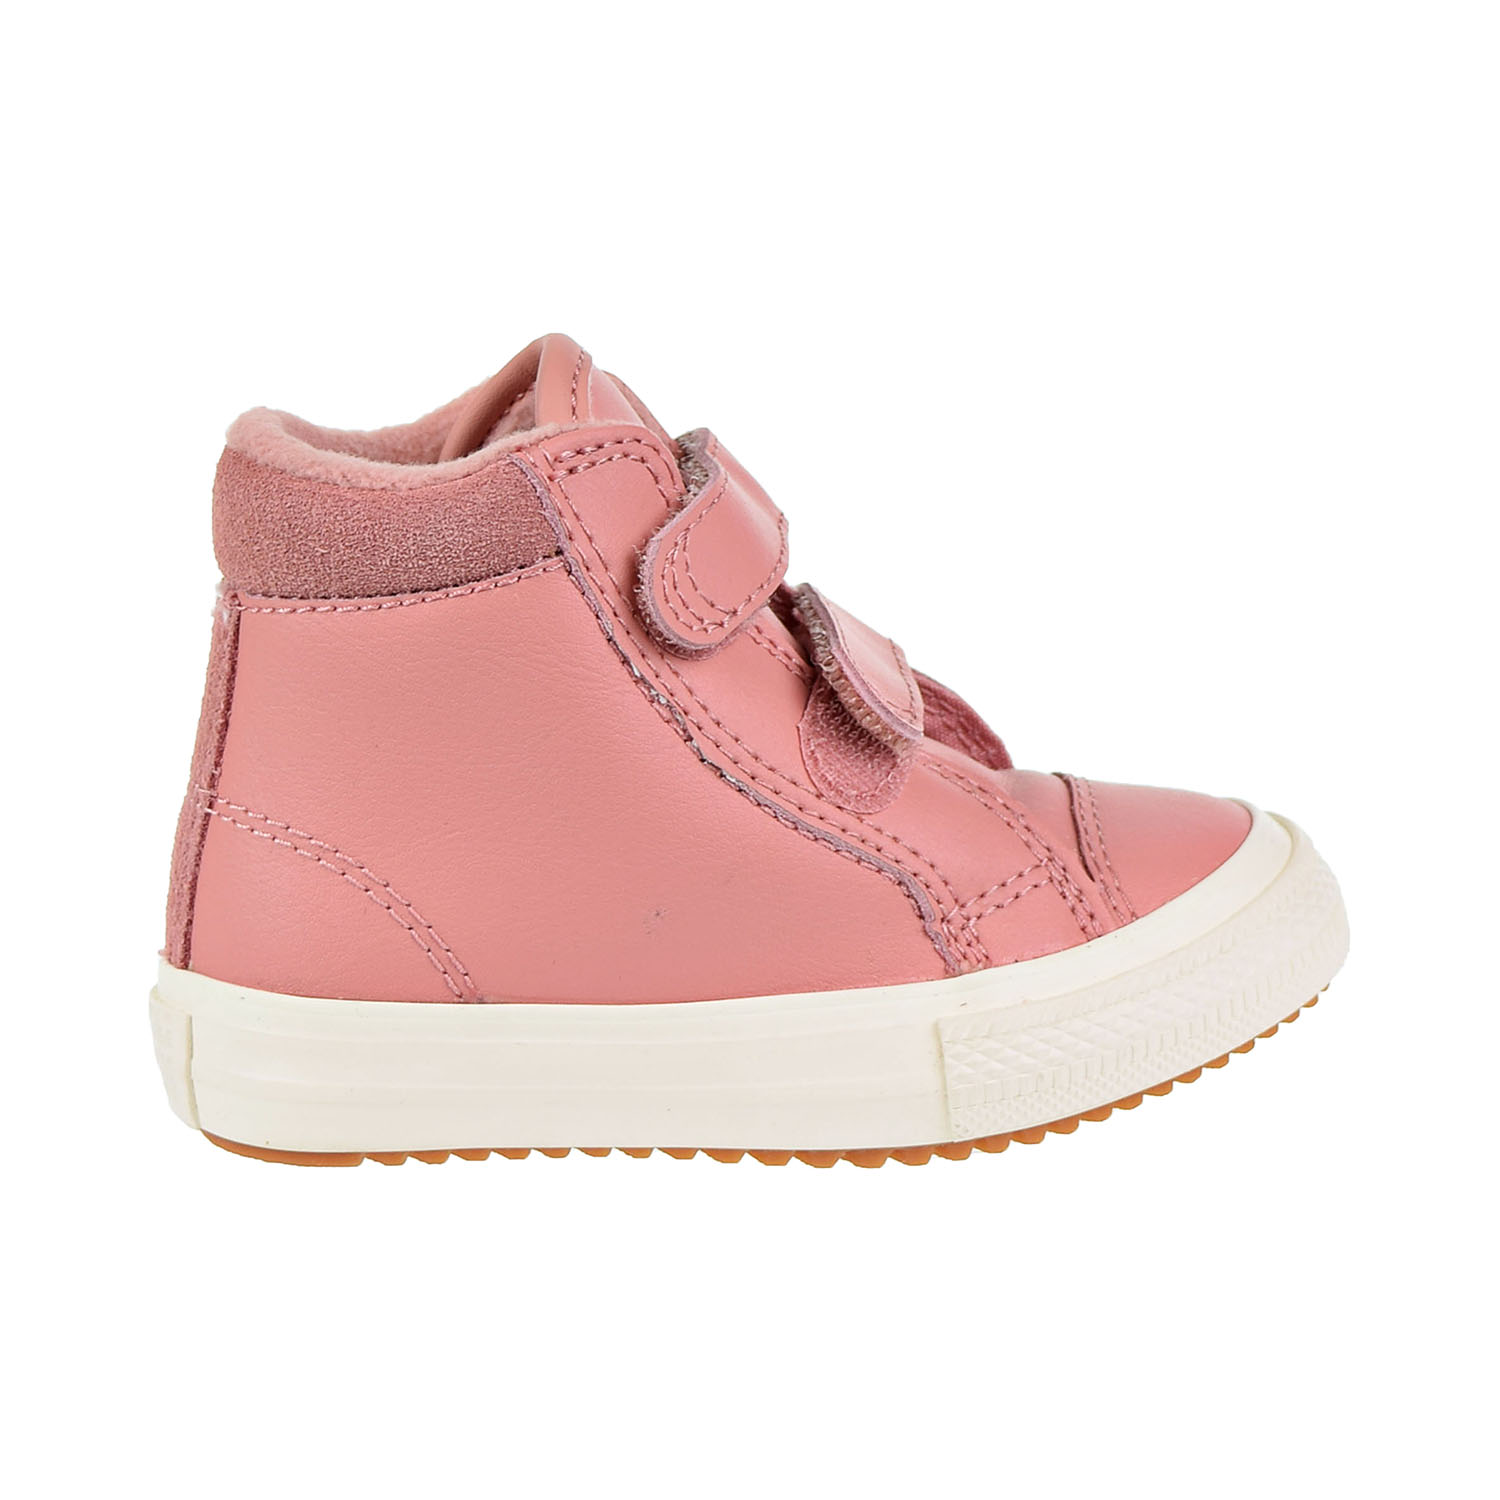 Converse Chuck Taylor All Star 2V Pc Boot Hi Toddler's Shoes Rust Pink ...